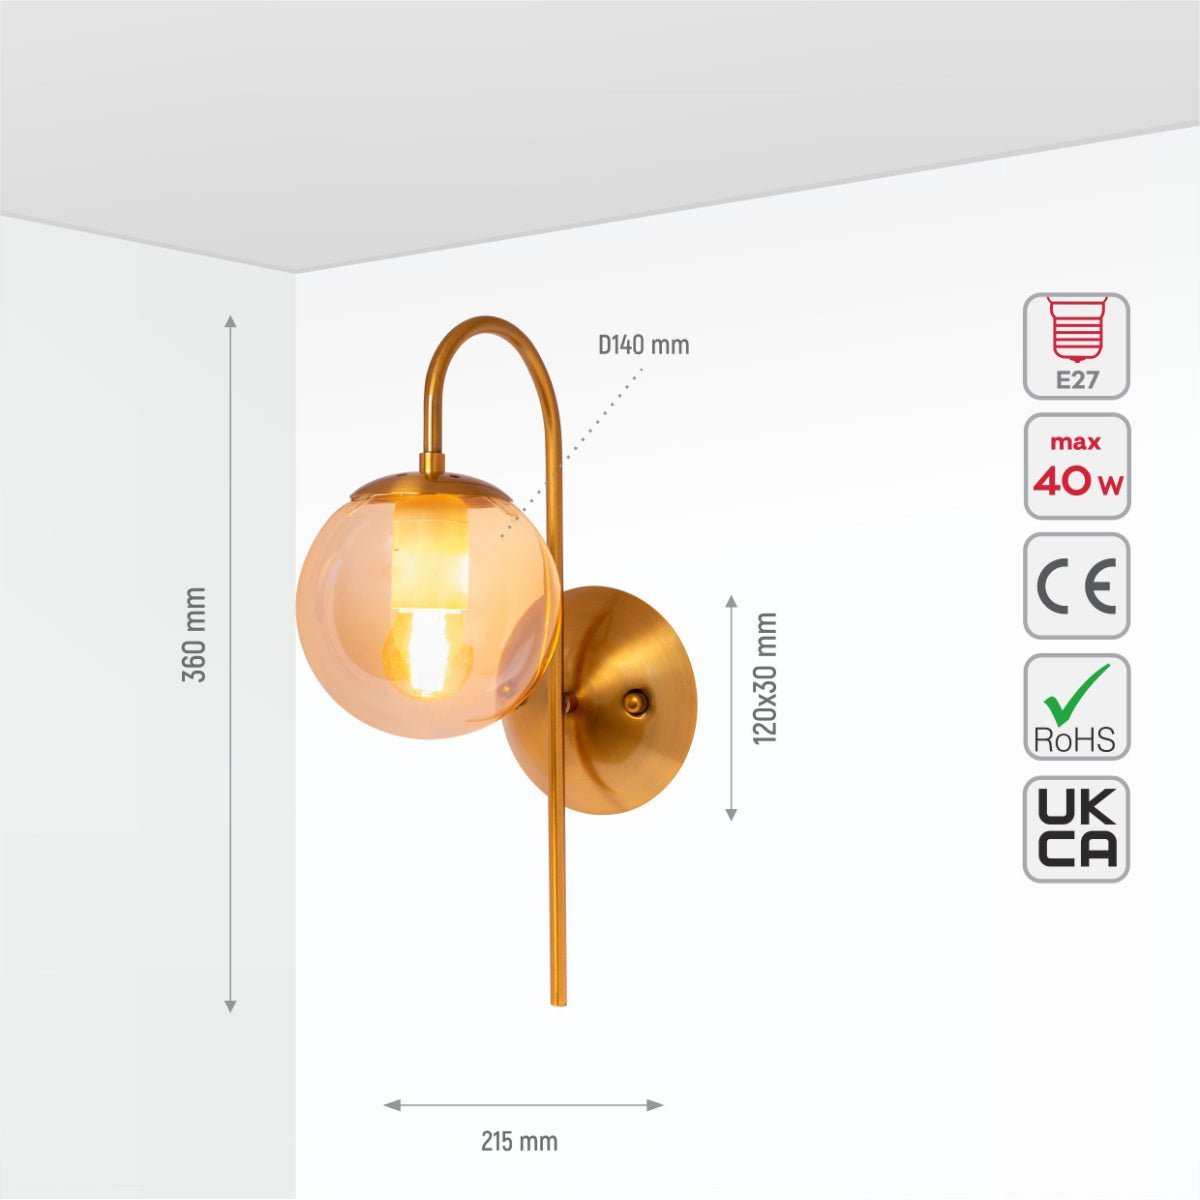 Size and specs of Amber Globe Glass Gold Aluminium Bronze Cane Metal Downward Wall Light with E27 Fitting | TEKLED 151-19488